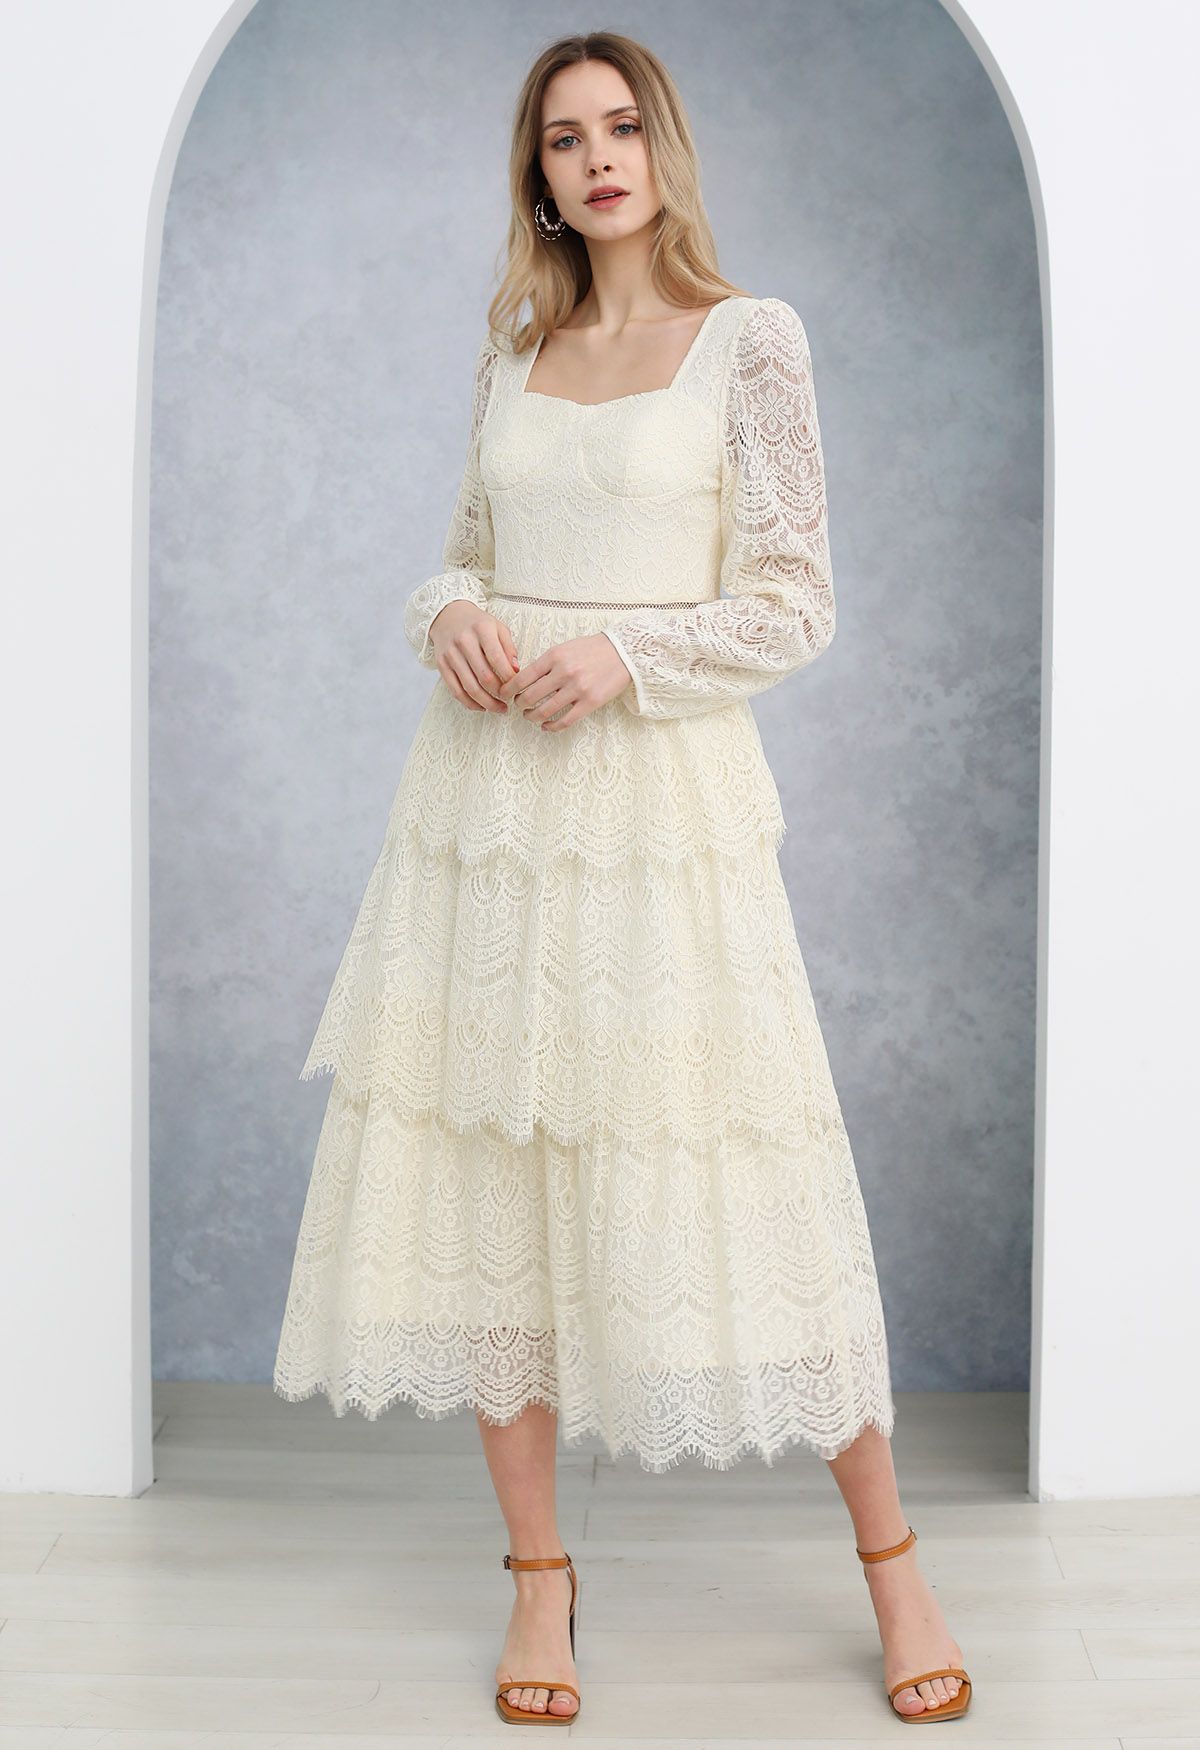 Elegant and Delicate Lace Dress